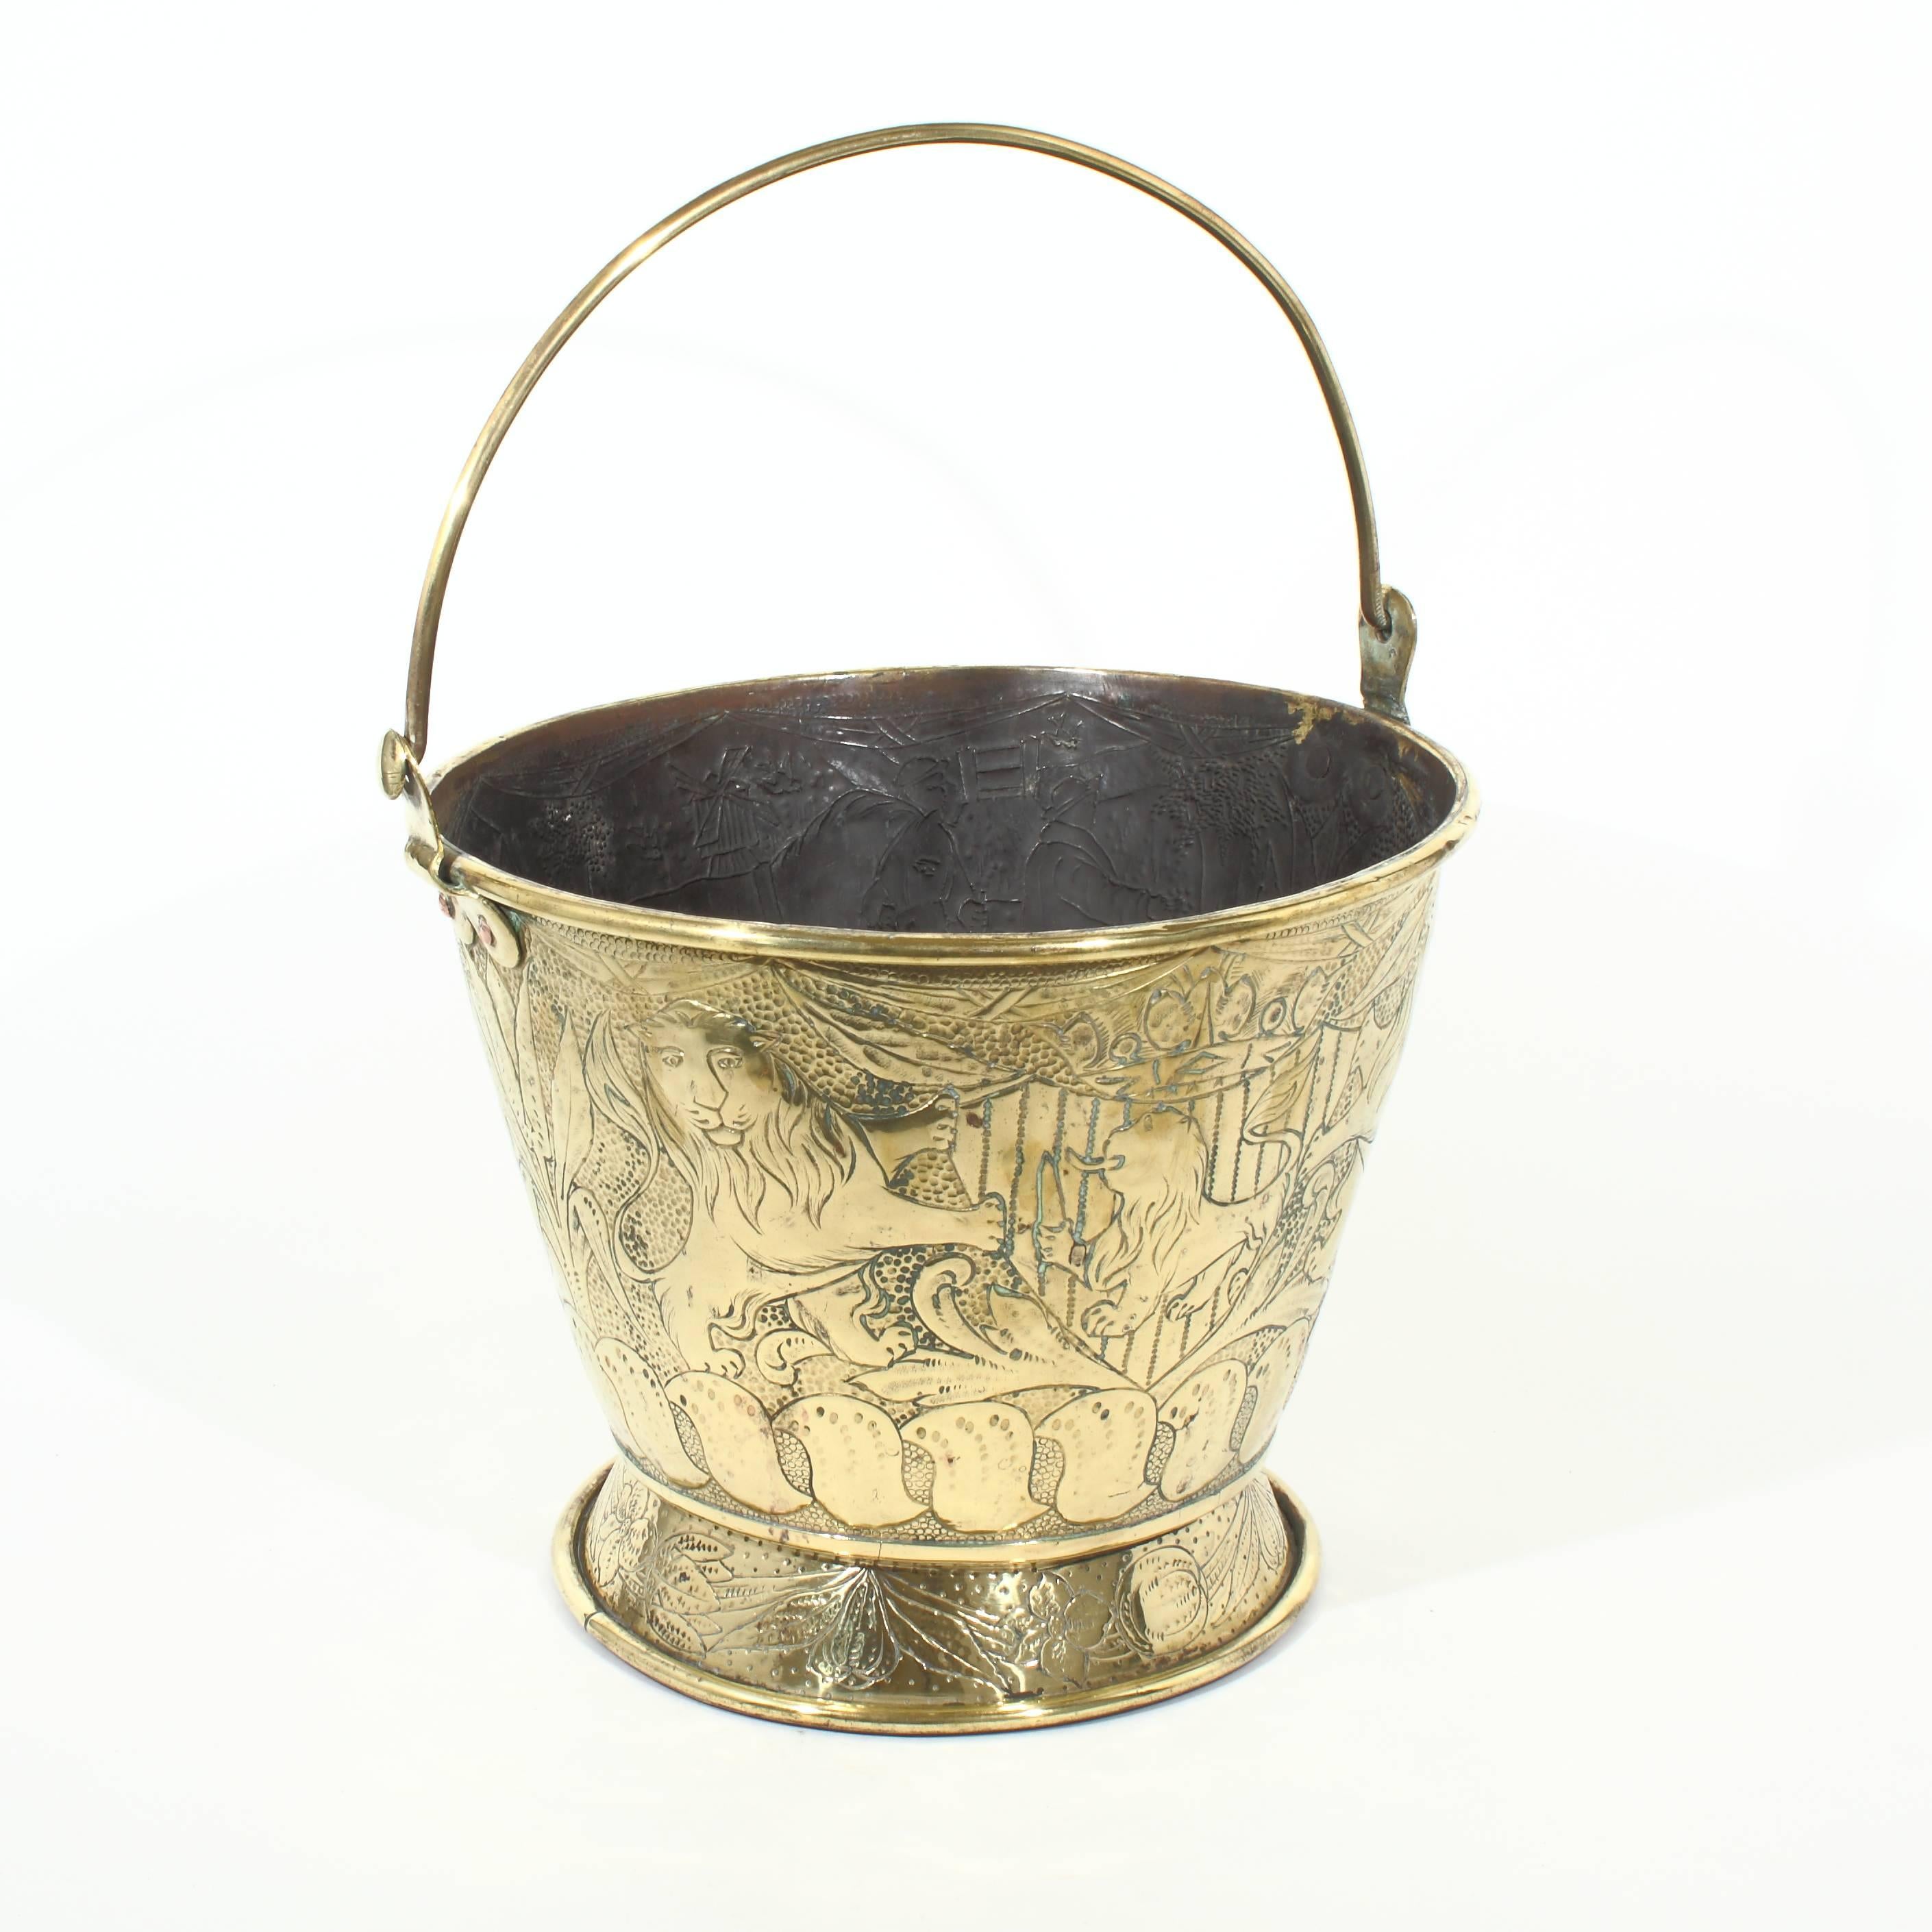 Dutch, embossed brass bucket with swing handle.

Horse and man on one side and two lions on the other, circa 1890.
Height to rim 10.75